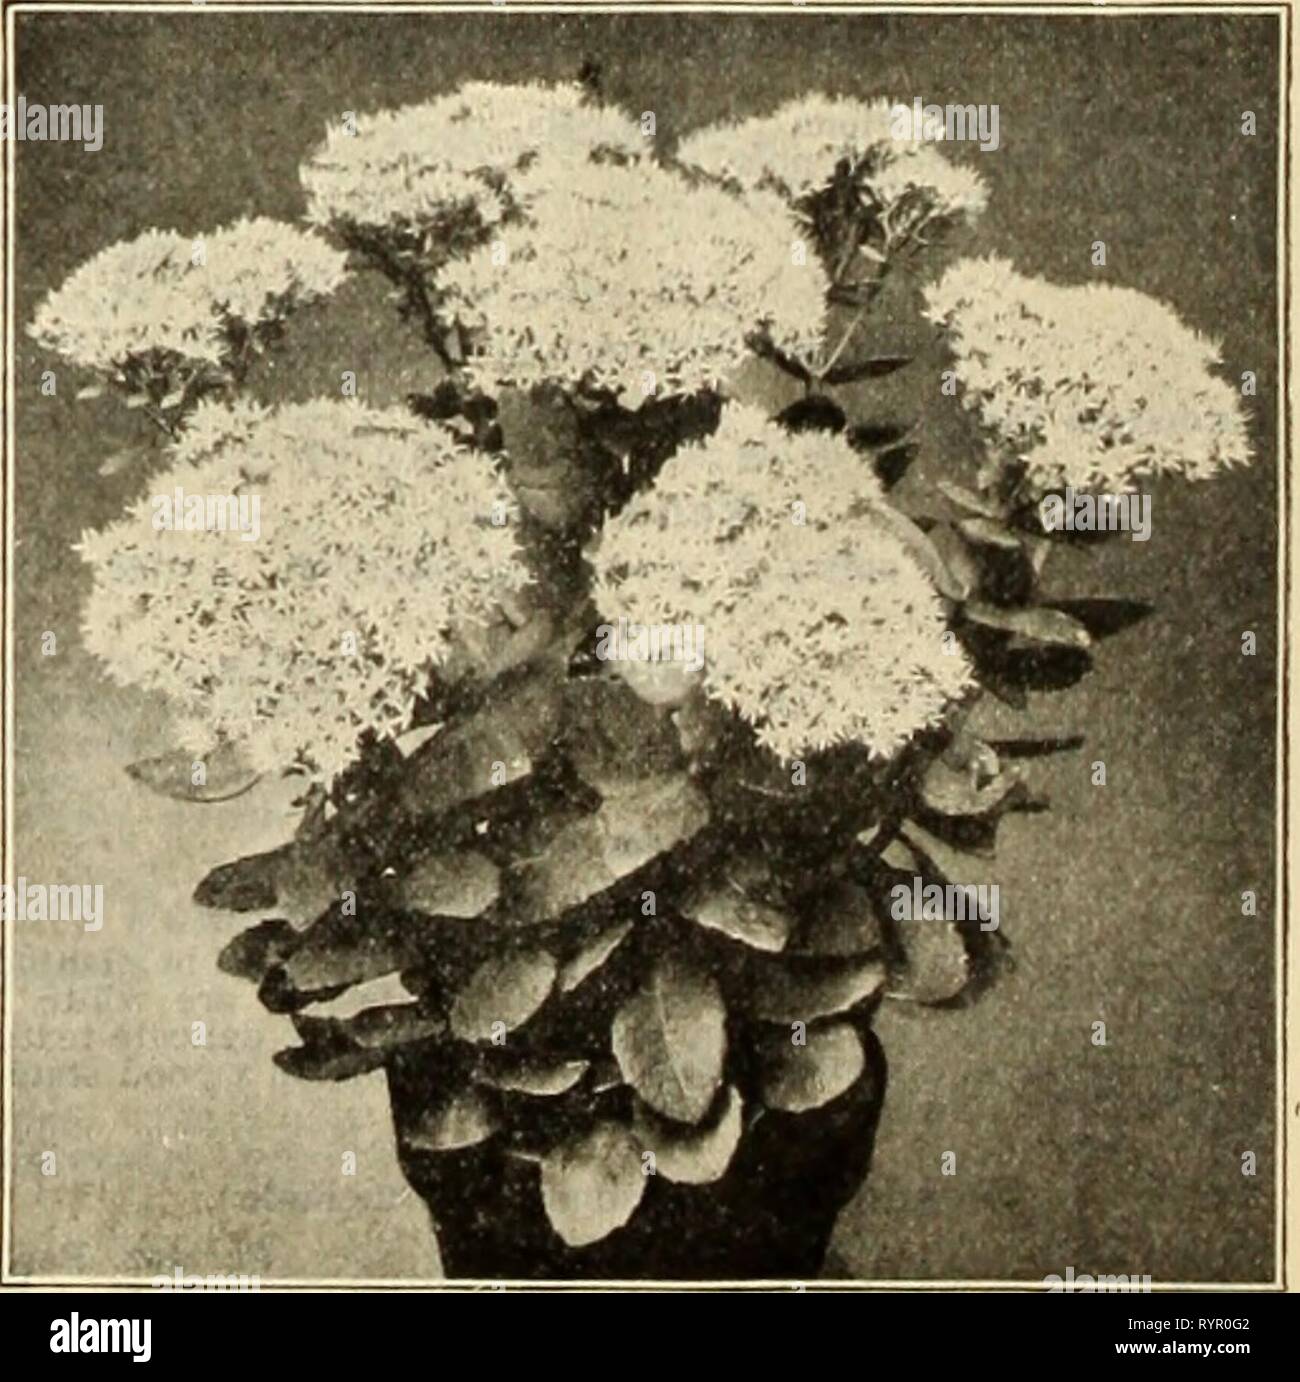 Dreer's wholesale price list of Dreer's wholesale price list of seeds plants and bulbs for florists : fertilizers, insecticides, tools and sundries . dreerswholesalep1912henr 1 Year: 1912  STOKESIA CYANEA (Cornflower Aster) Scutellaria (Skull Cap). Per d02. Per 100 Cxiestlna. 3-inch pots $1 00 Â»7 00 Sedum (Stonecrop). Acre. 4-inch pots 85 Album. Divisions. 4-inch pots 85 Japonica Macrophylla. 4-inch pots 1 00 Lydlum Glaucum. 3-inch pots . 1 00 SexanKulare. 4-inch pots K5 SpectabiUs Atropurpureum. Showy heads of hand sonif deep rosv-crimson flowers SpectabiUs Brilliant â new i. The brightest o Stock Photo